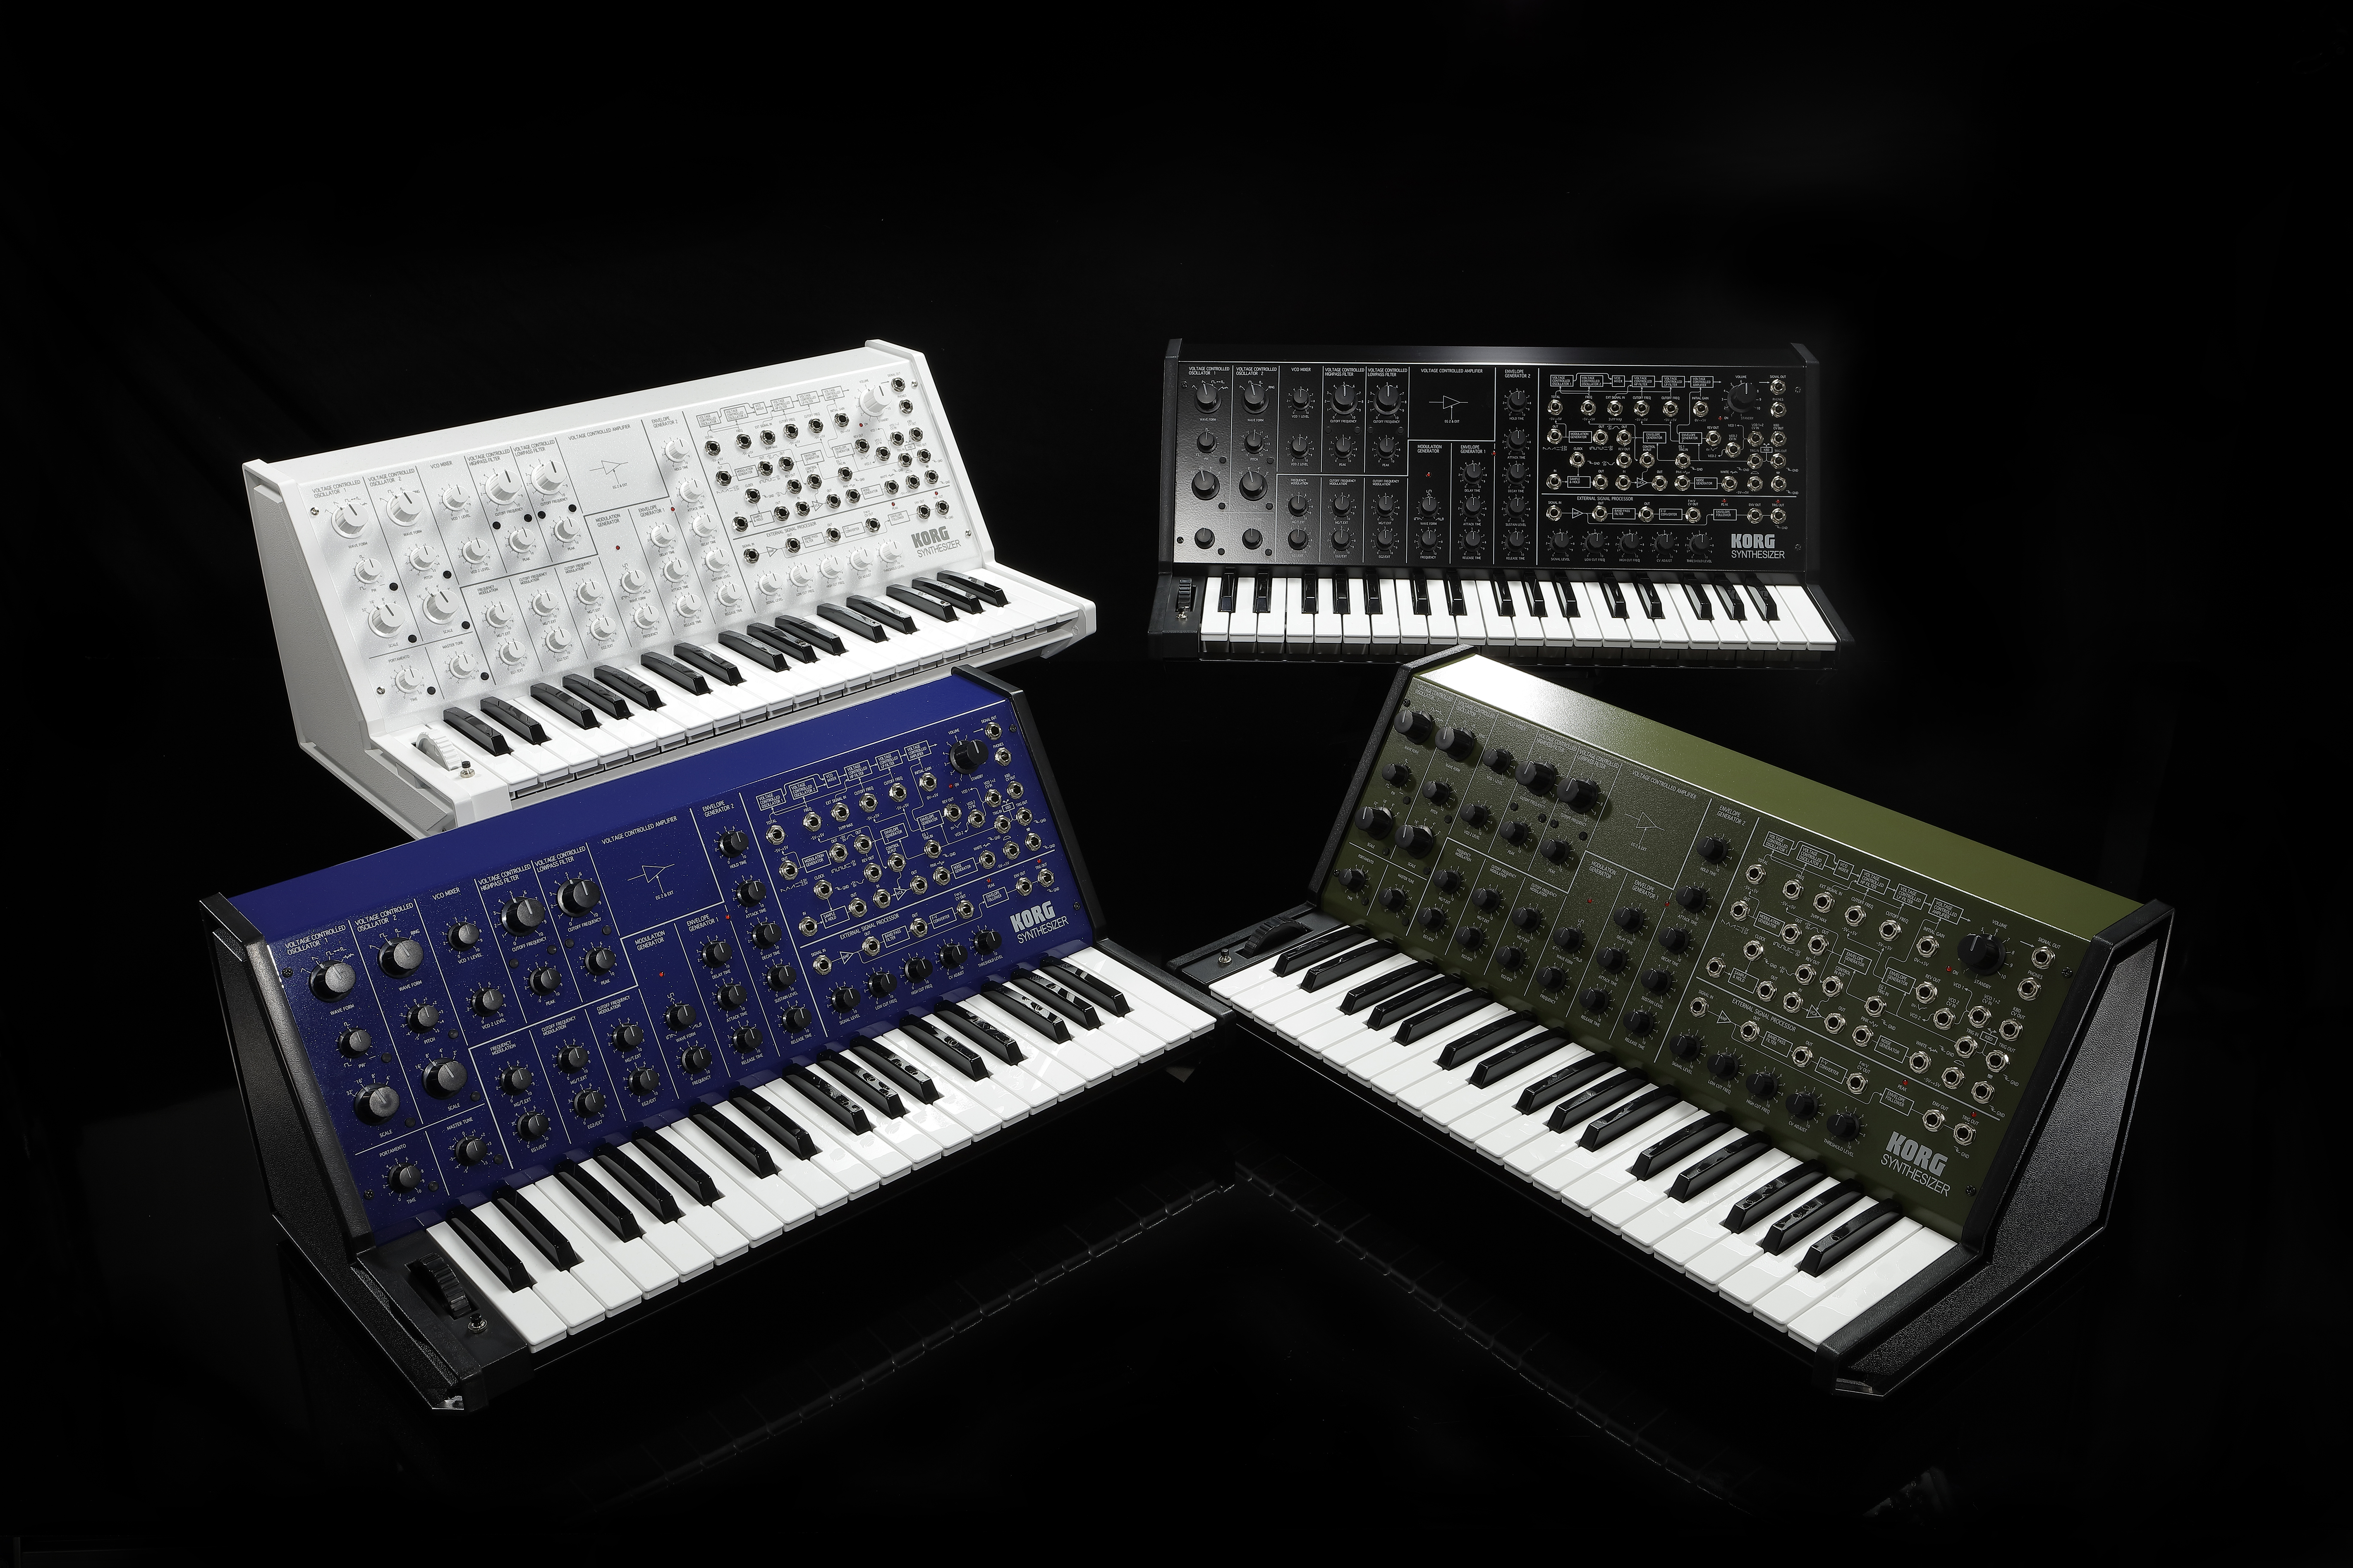 Korg Reissues Their Legendary MS-20 Monophonic Synthesizer